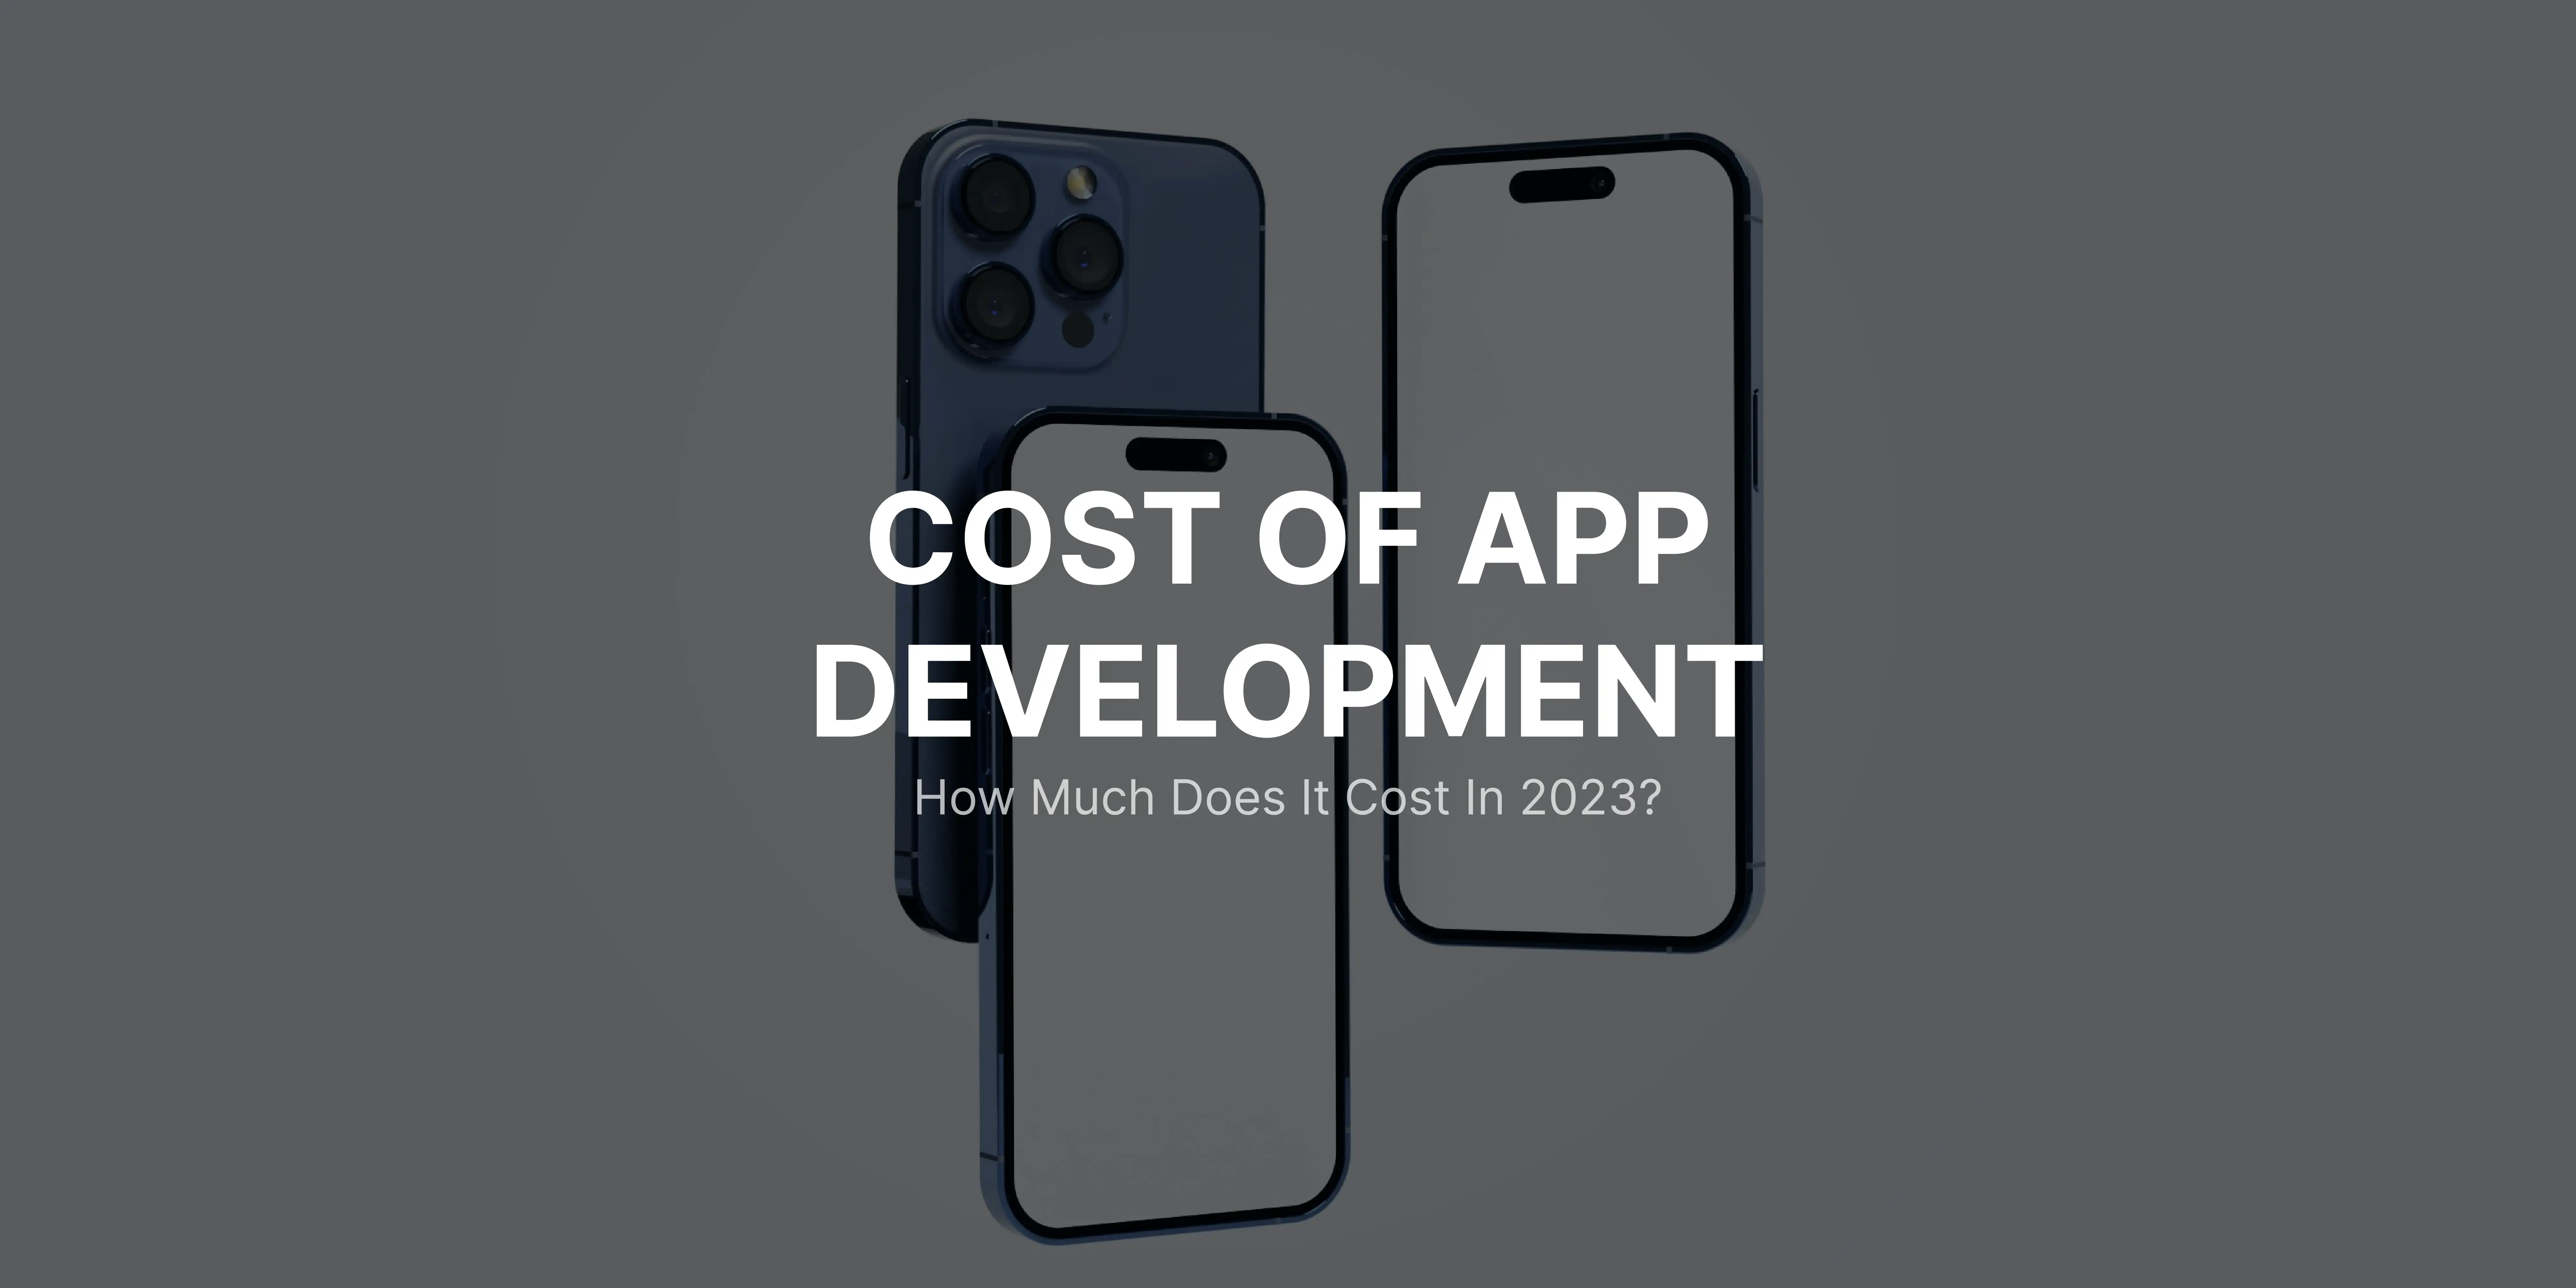 How much does it cost to develop an app from scratch in 2023?